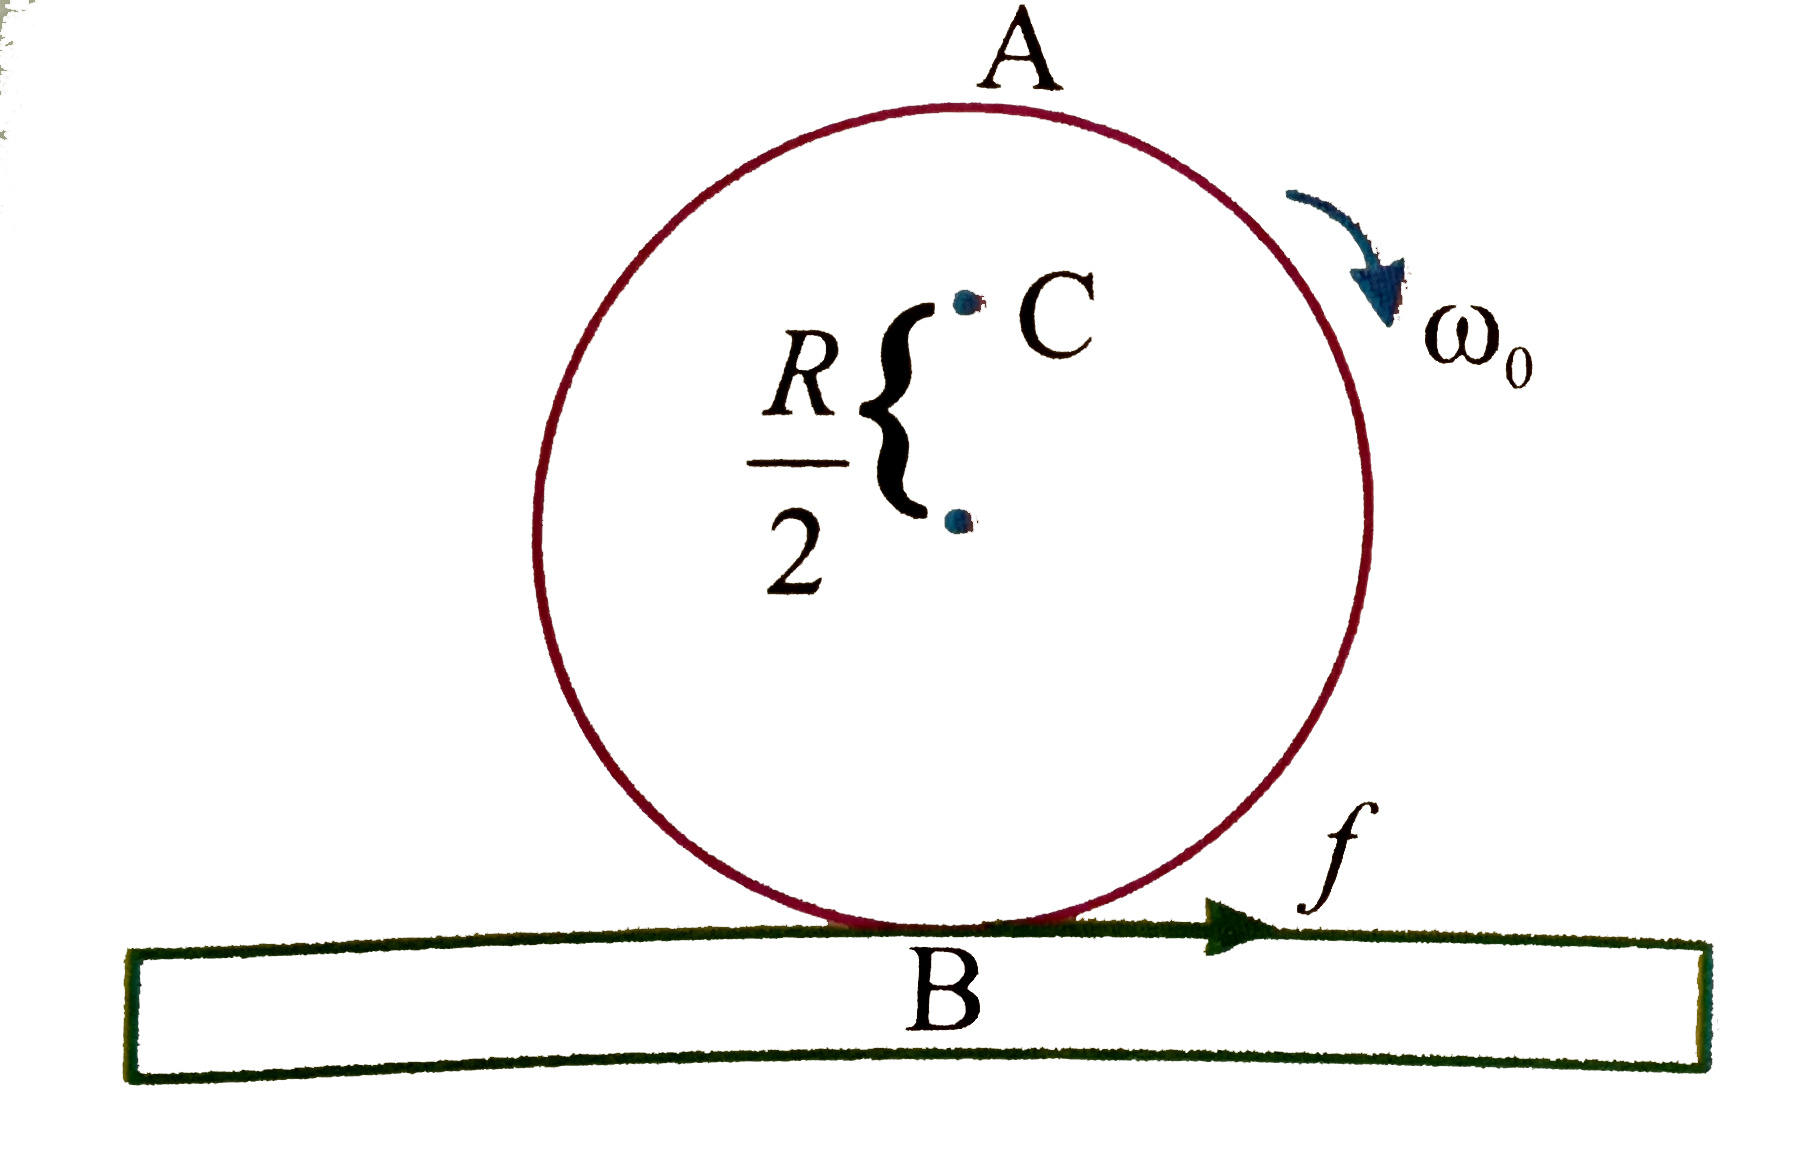 A disc rotating about its axis with angular speed omega0 is placed lightly (without any translational push) on a perfectly frictionless table. The radius of the disc is R. What are on the disc shown . Will the disc roll in the direction indicated?